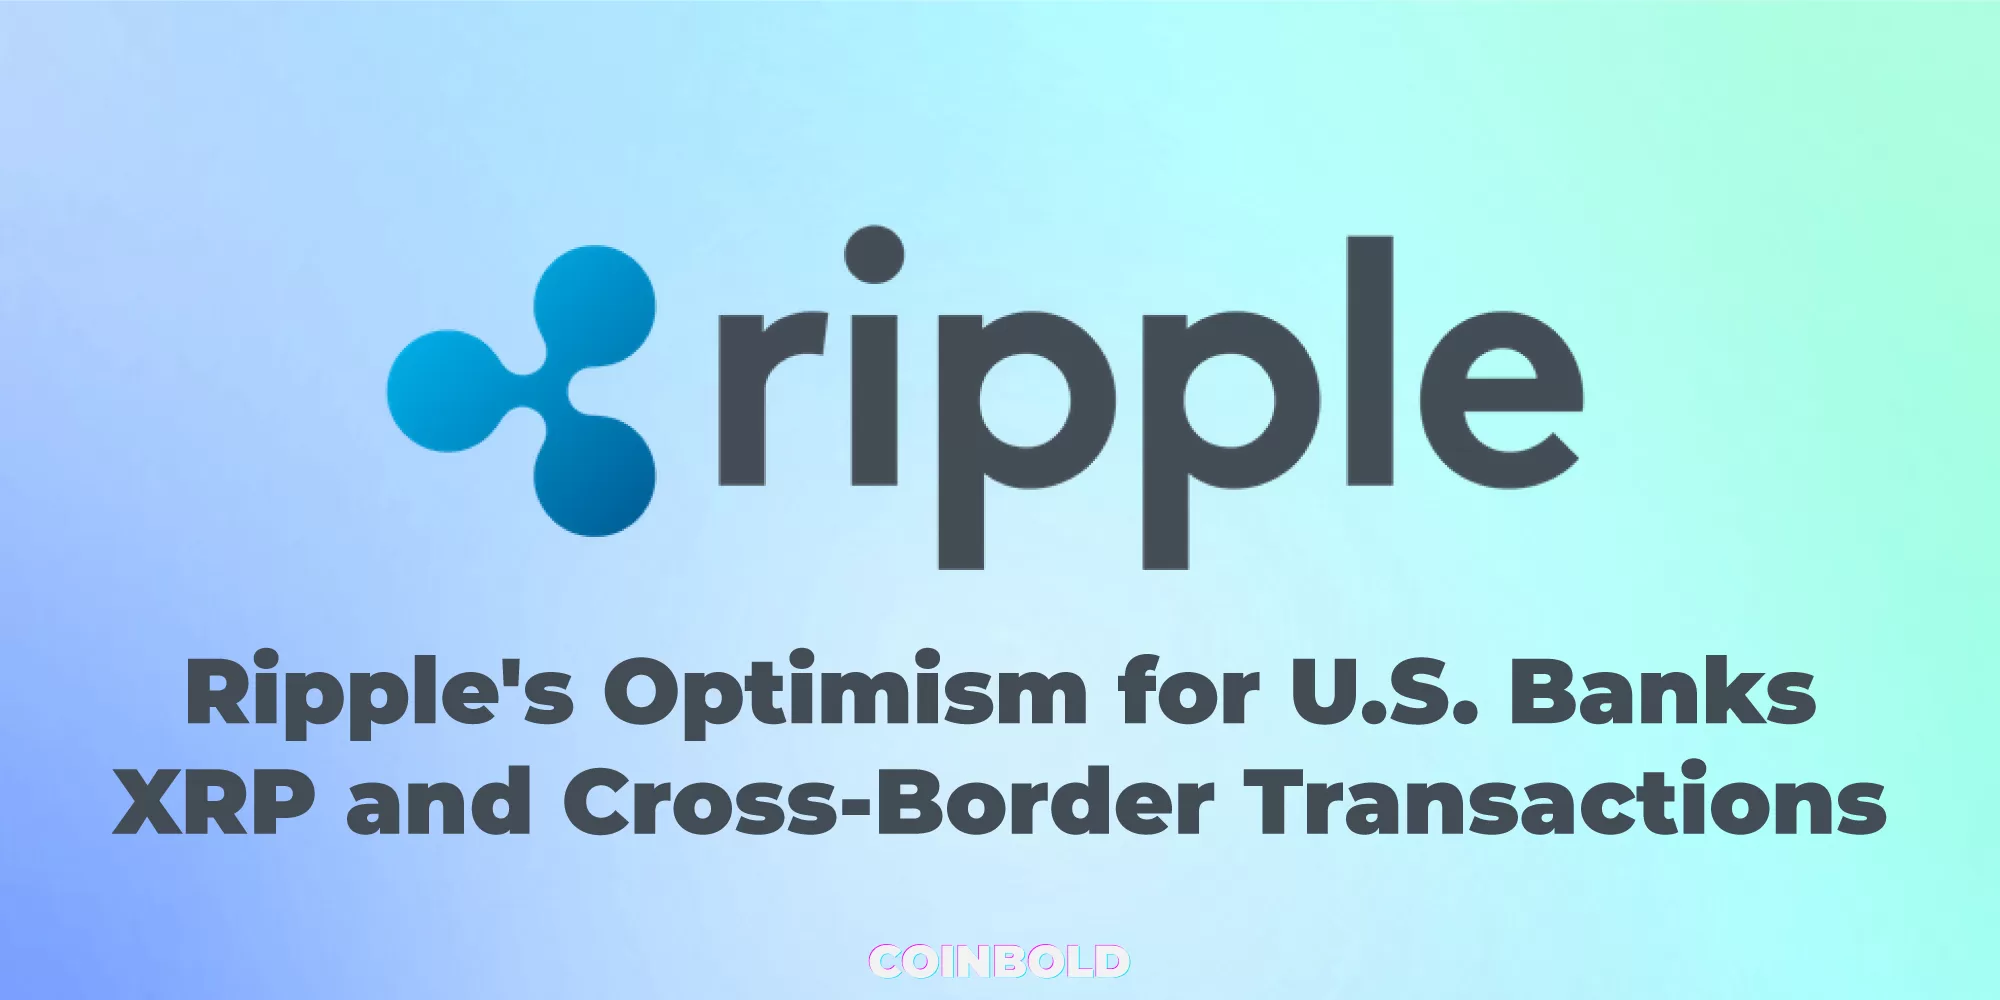 Ripple's Optimism for U.S. Banks: XRP and Cross-Border Transactions